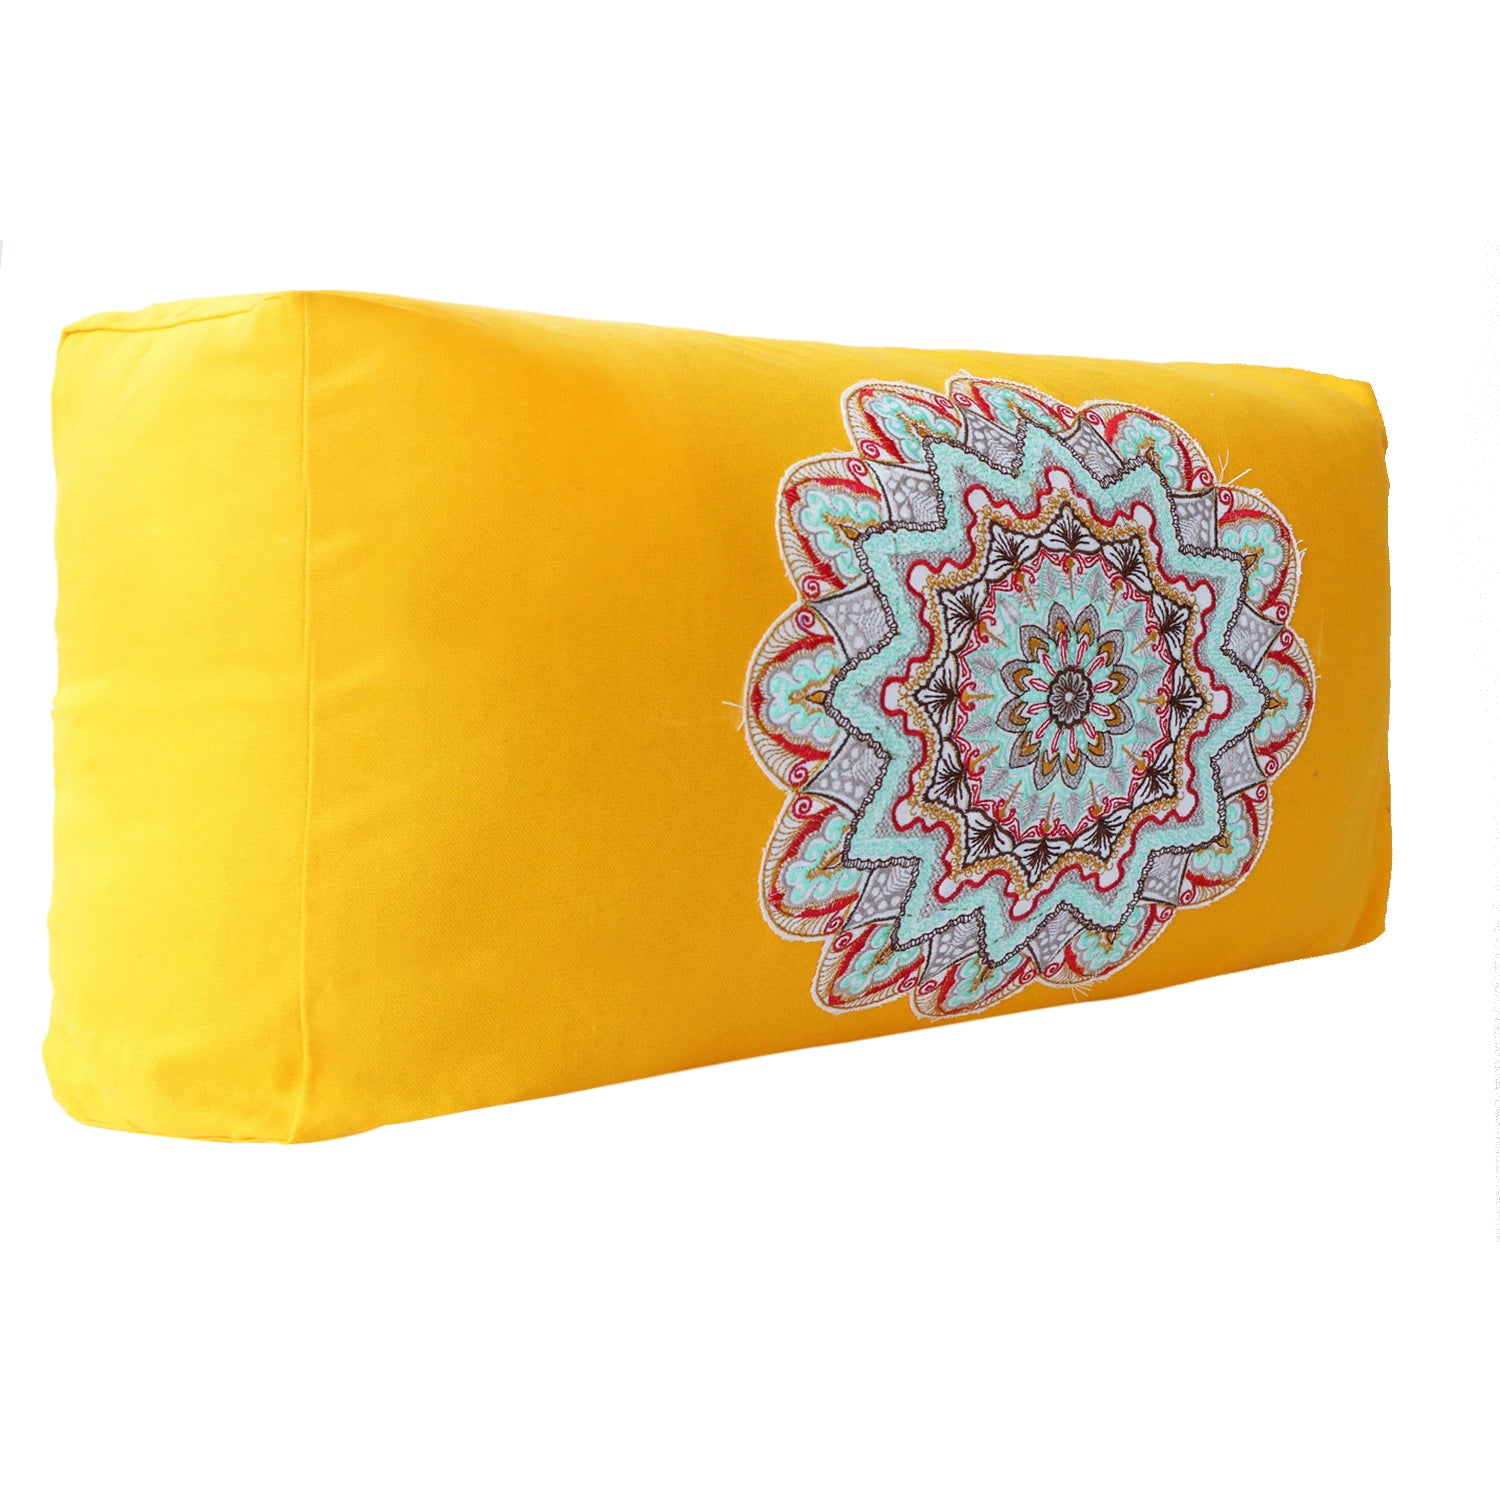 Rectangular Embroidered Yoga Bolster Pillow for Meditation and Support